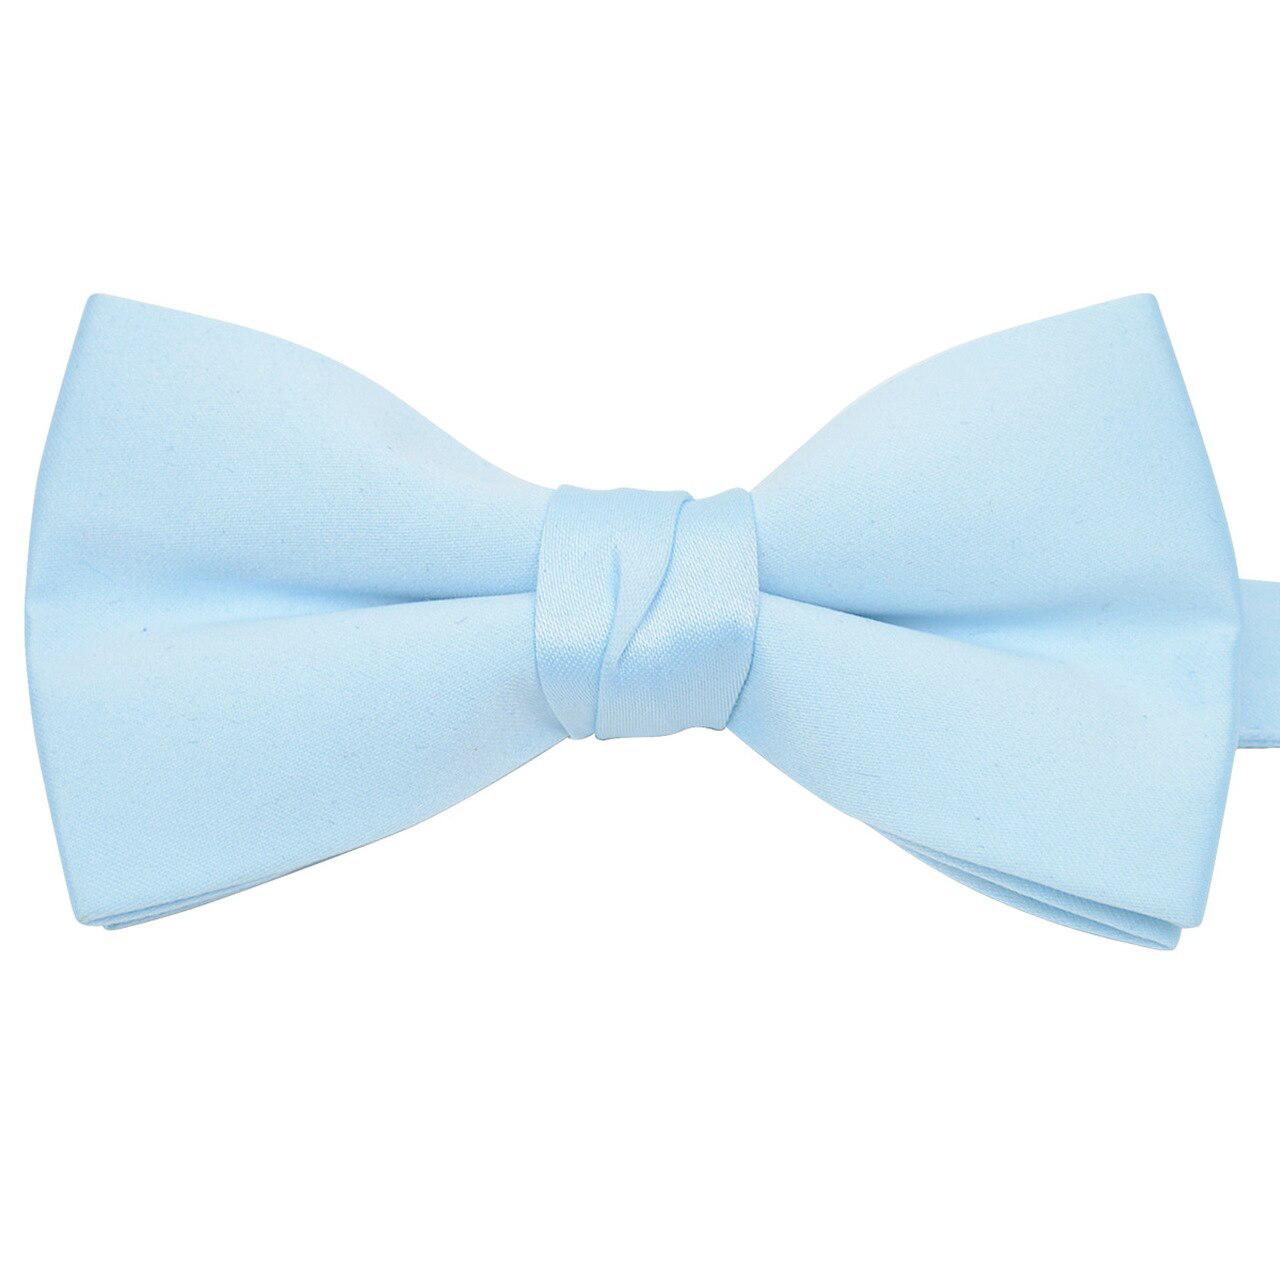  Solid Bow Tie Boxed - Sky Blue